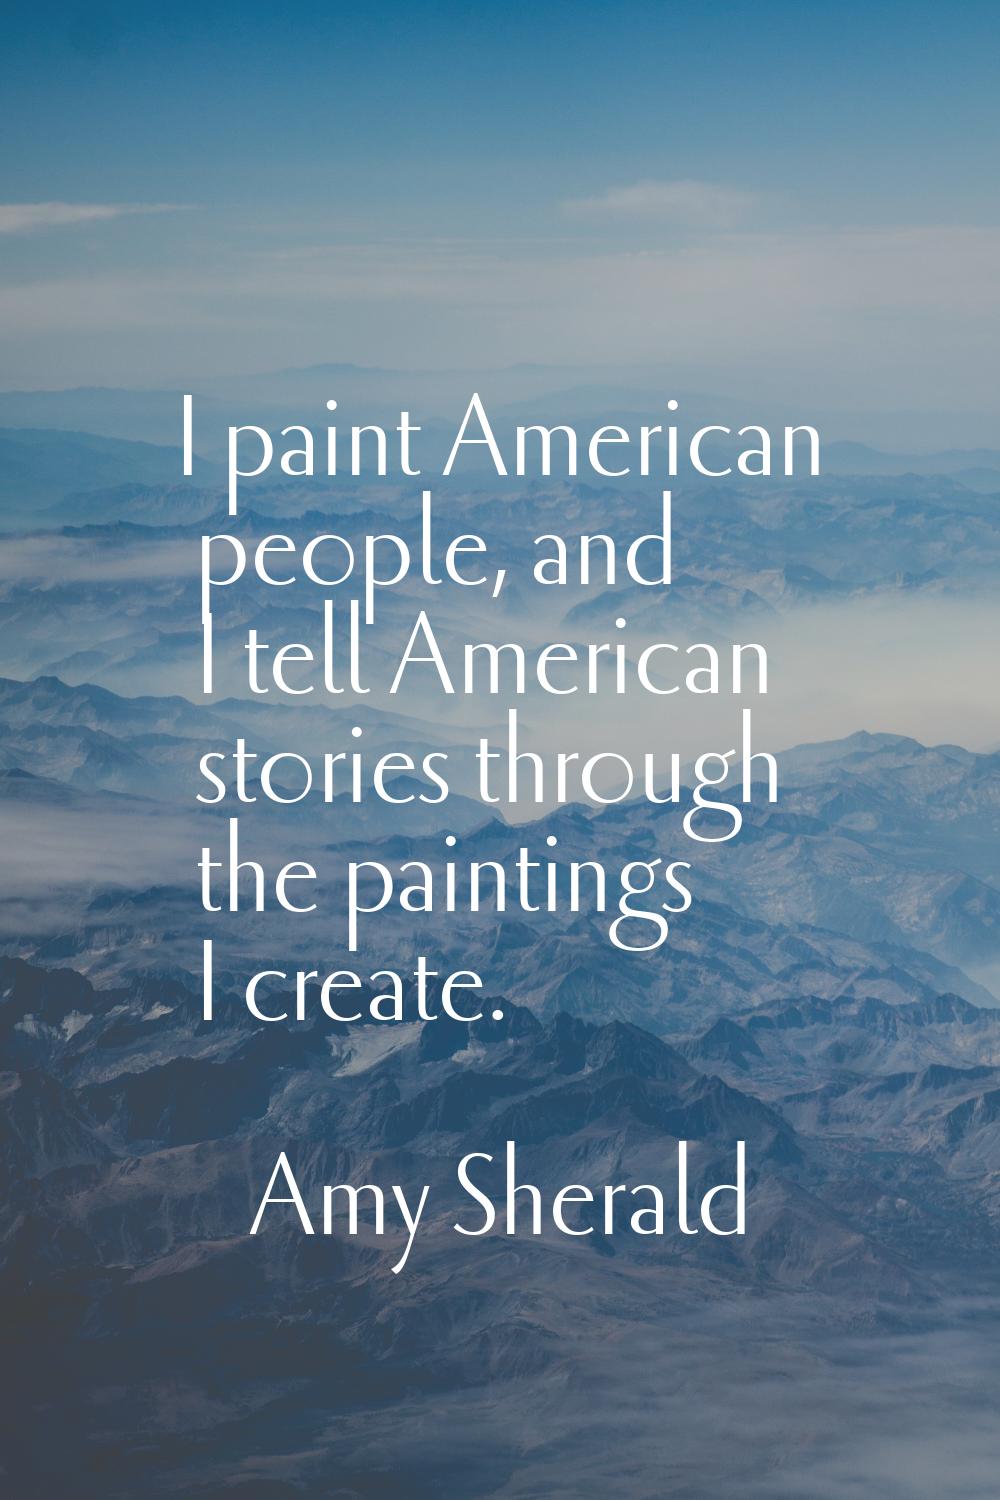 I paint American people, and I tell American stories through the paintings I create.